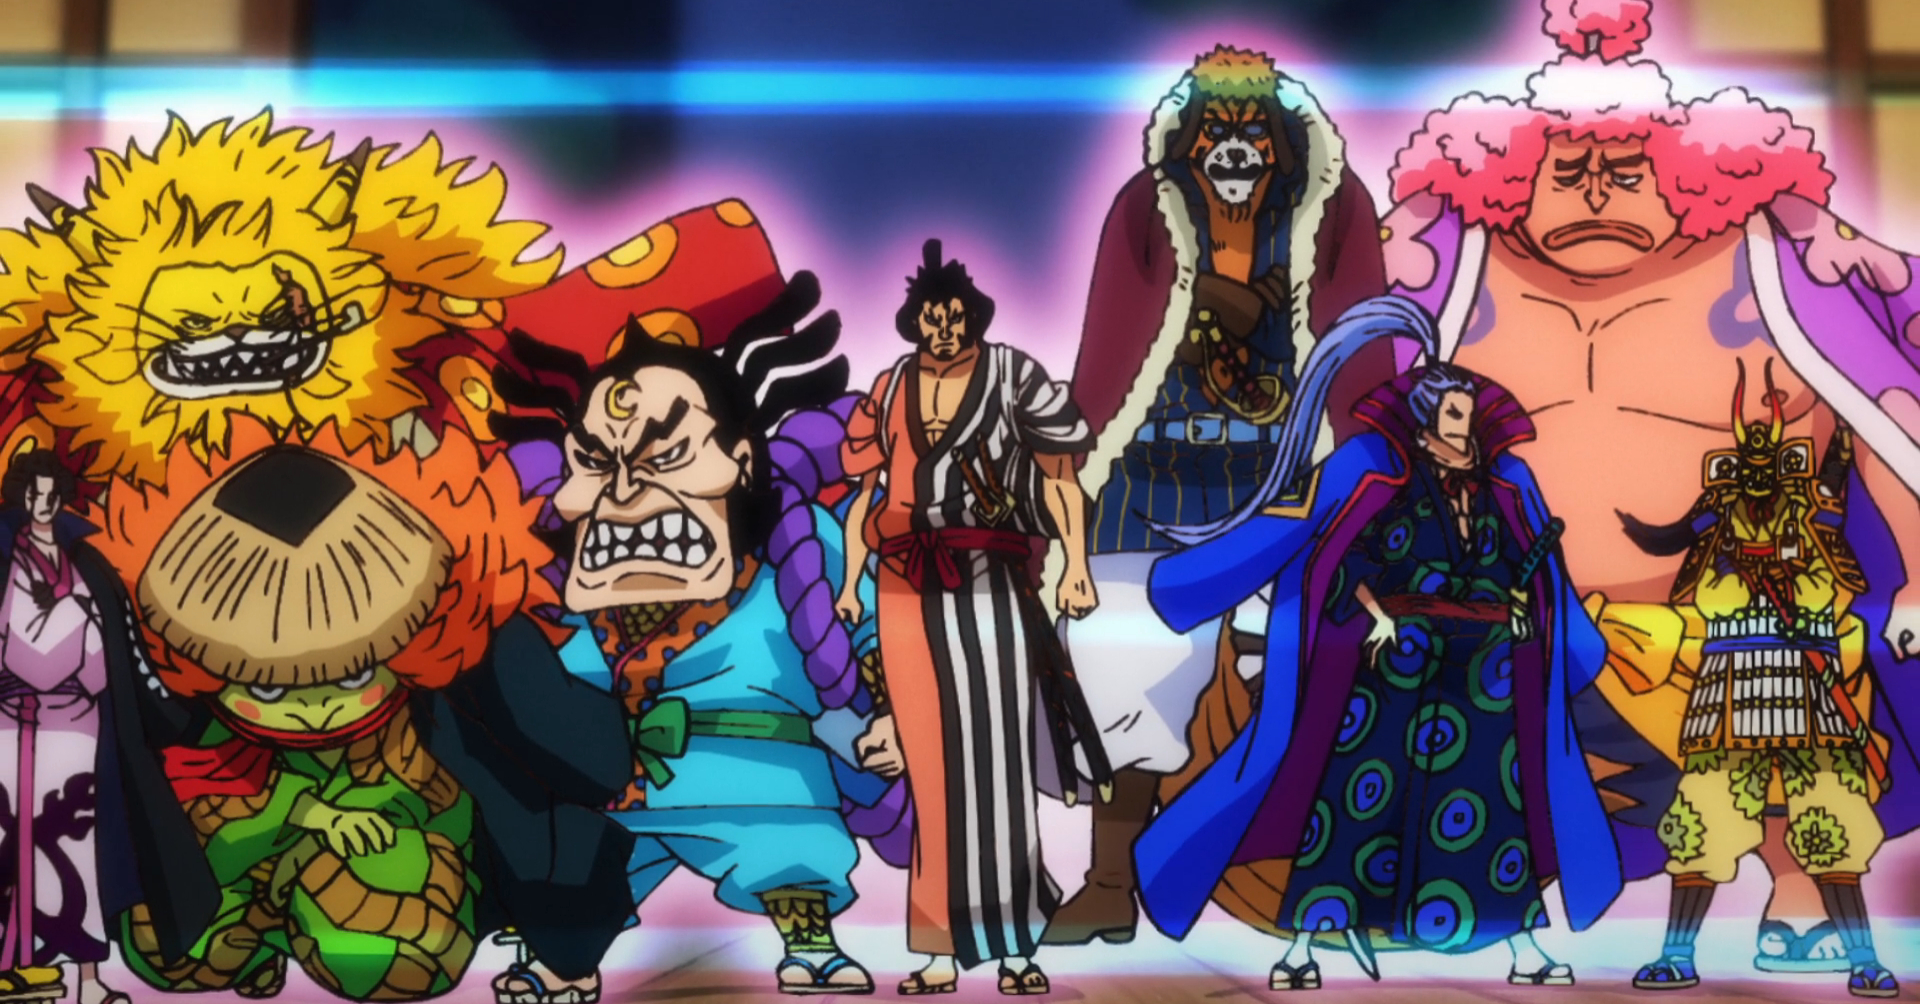 One Piece: WANO KUNI (892-Current) Oden Appears! The Confused Hearts of the  Akazaya Members! - Watch on Crunchyroll